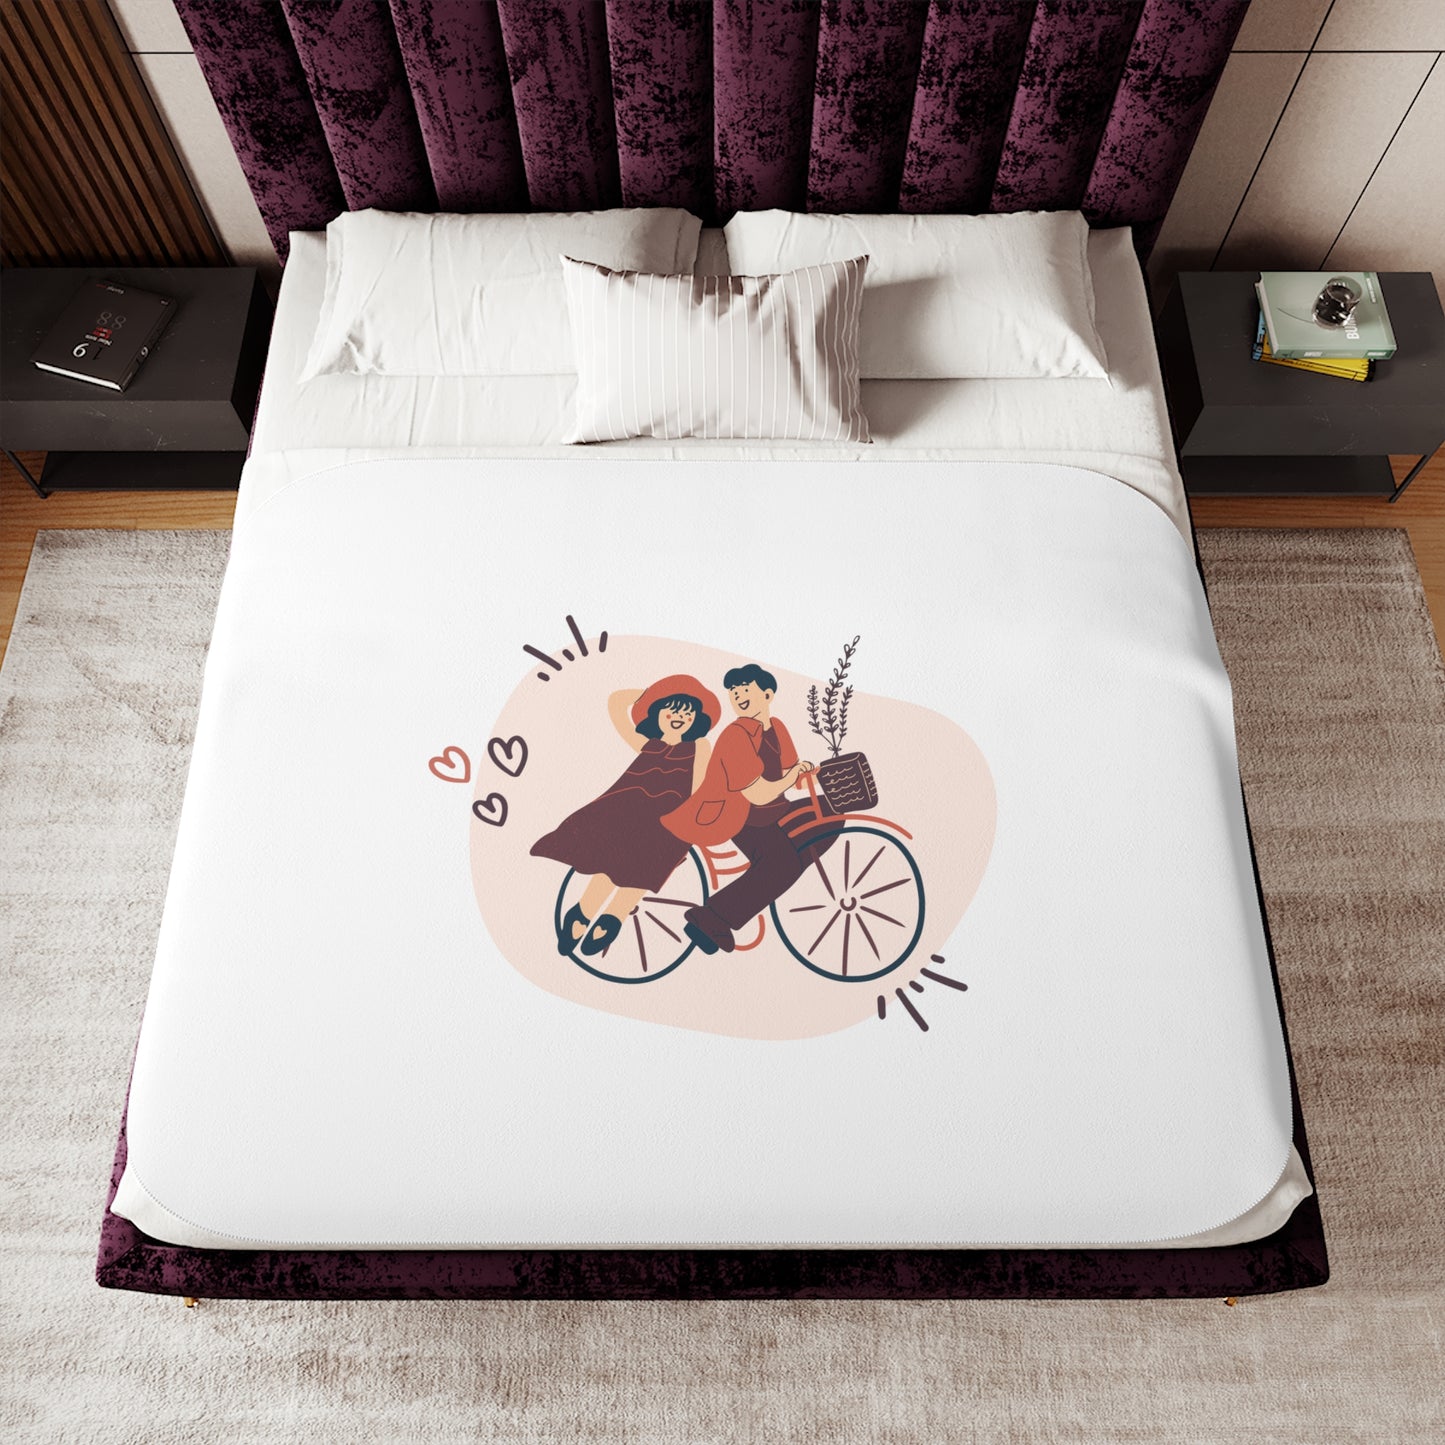 Couple on Cycle Printed Sherpa Blenket for Valentine Day